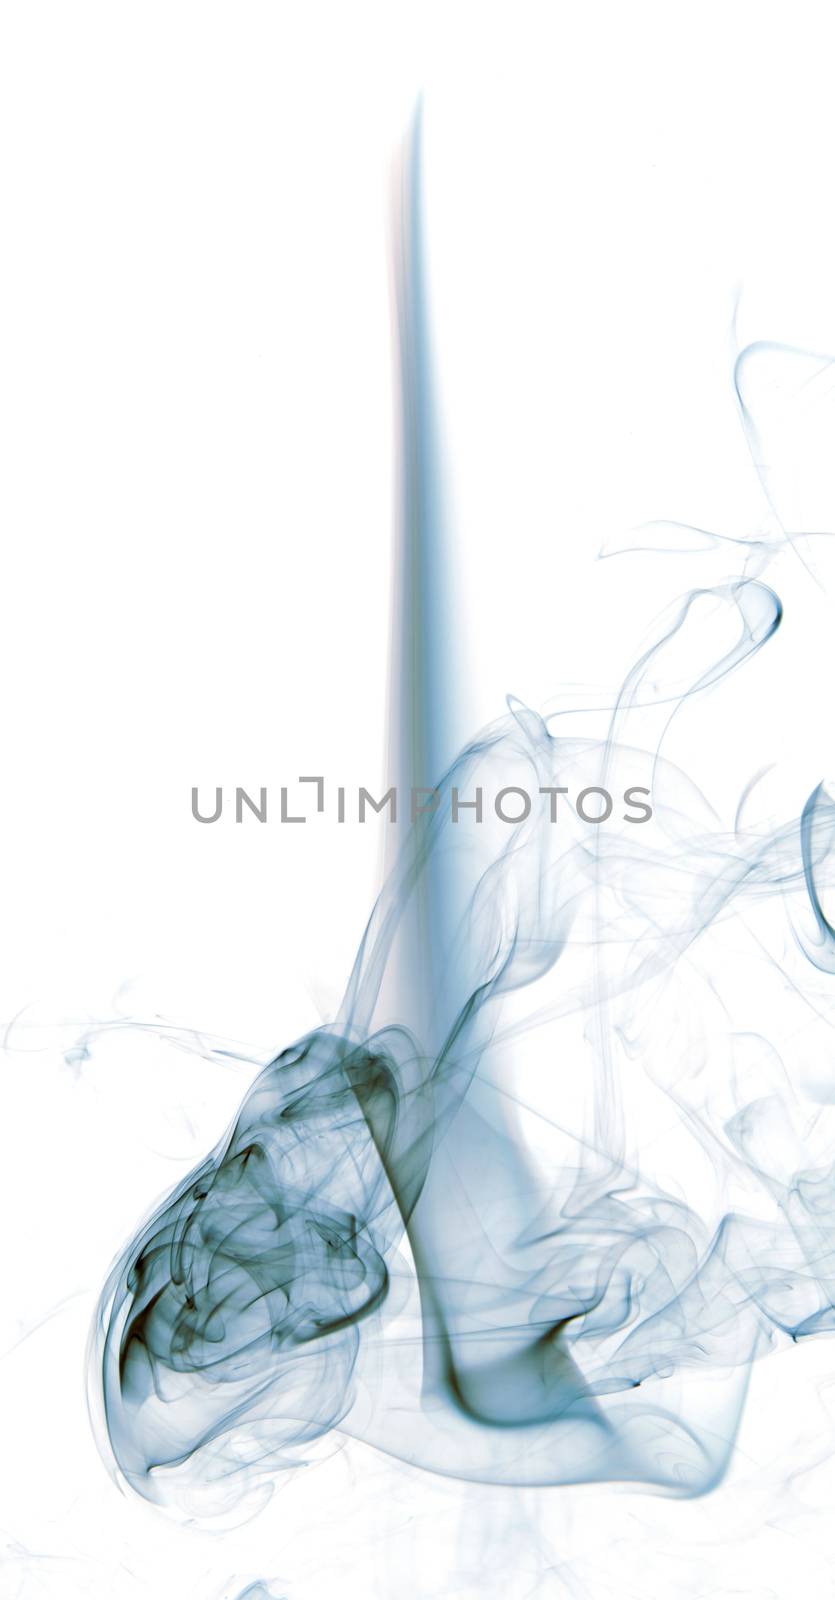 Blue insence smoke on white background with free space for your text.